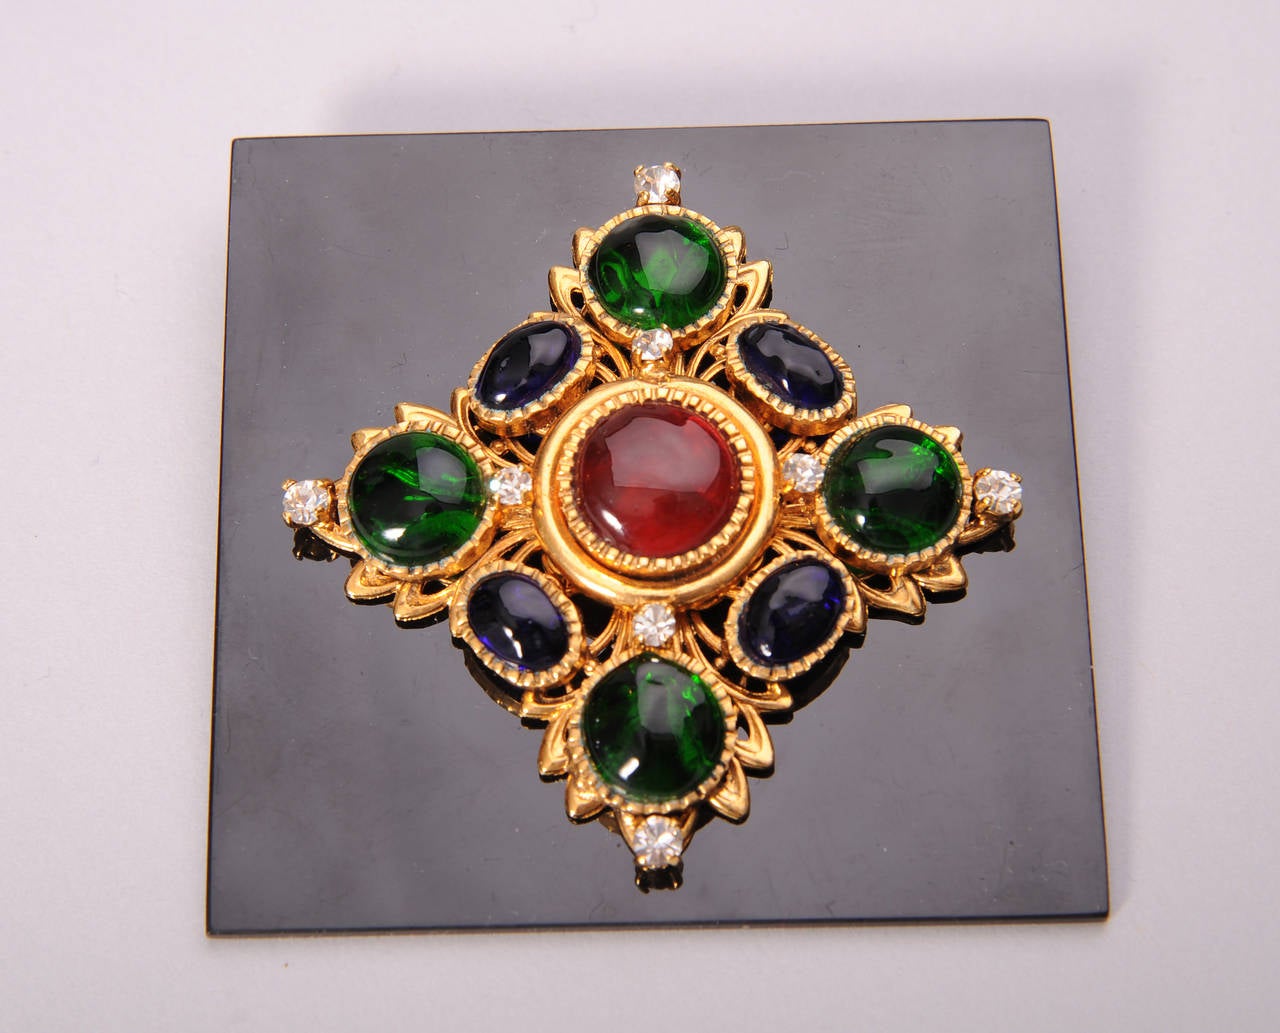 This gorgeous piece of Chanel Haute Couture jewelry is still pinned to the original backing. Gripoix stones in shades of deep green, red and sapphire blue are accented with smaller 